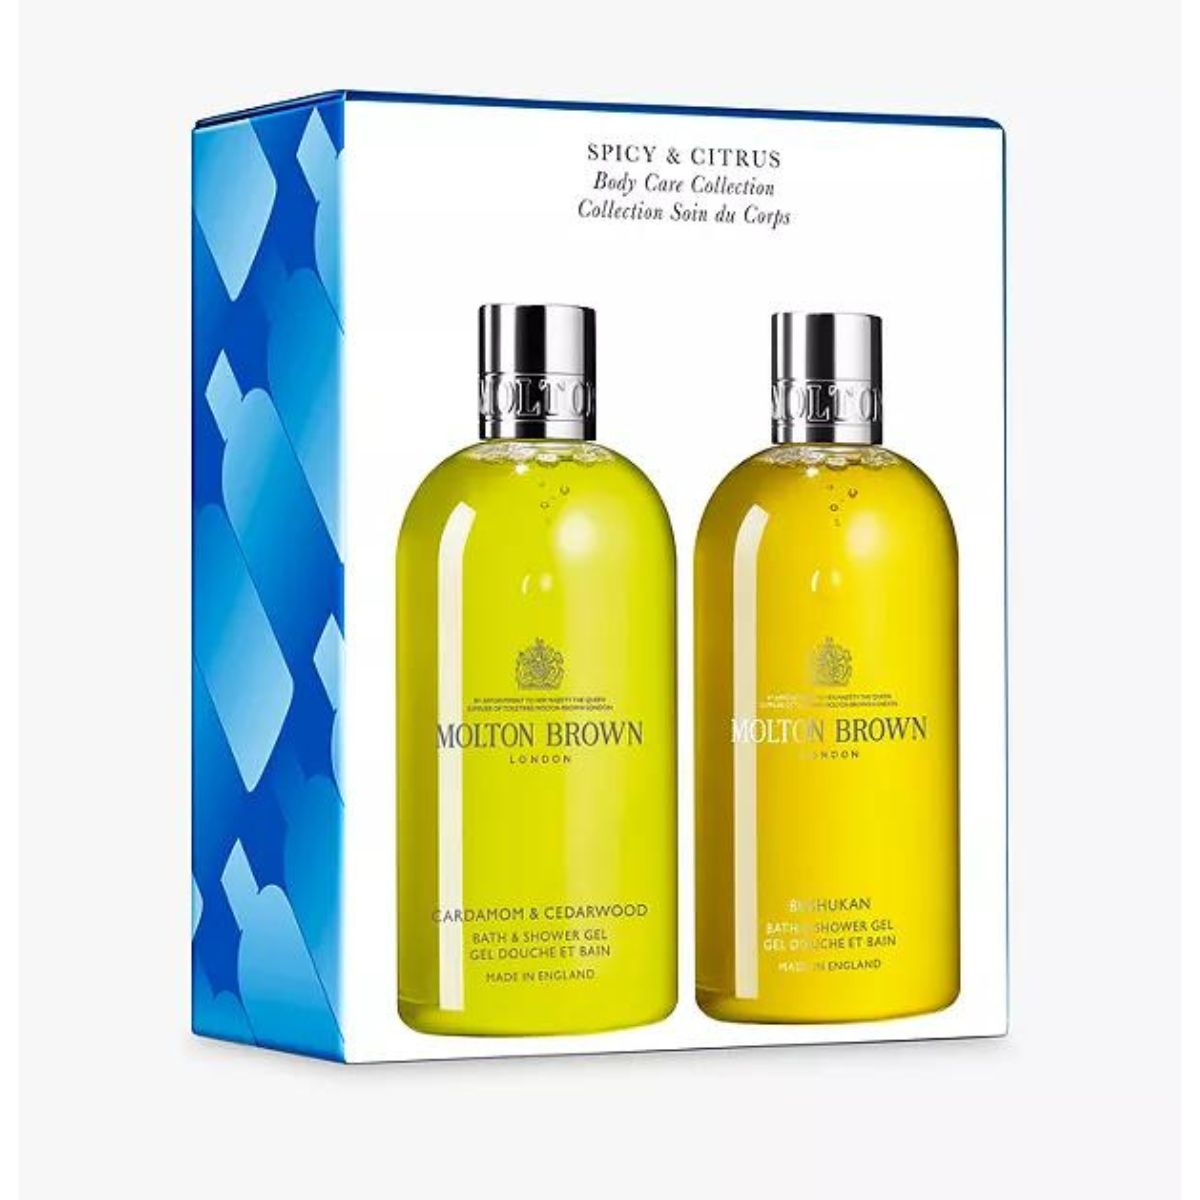 Molton Brown Spicy & Citrus Body Care Collection SAVE 32%